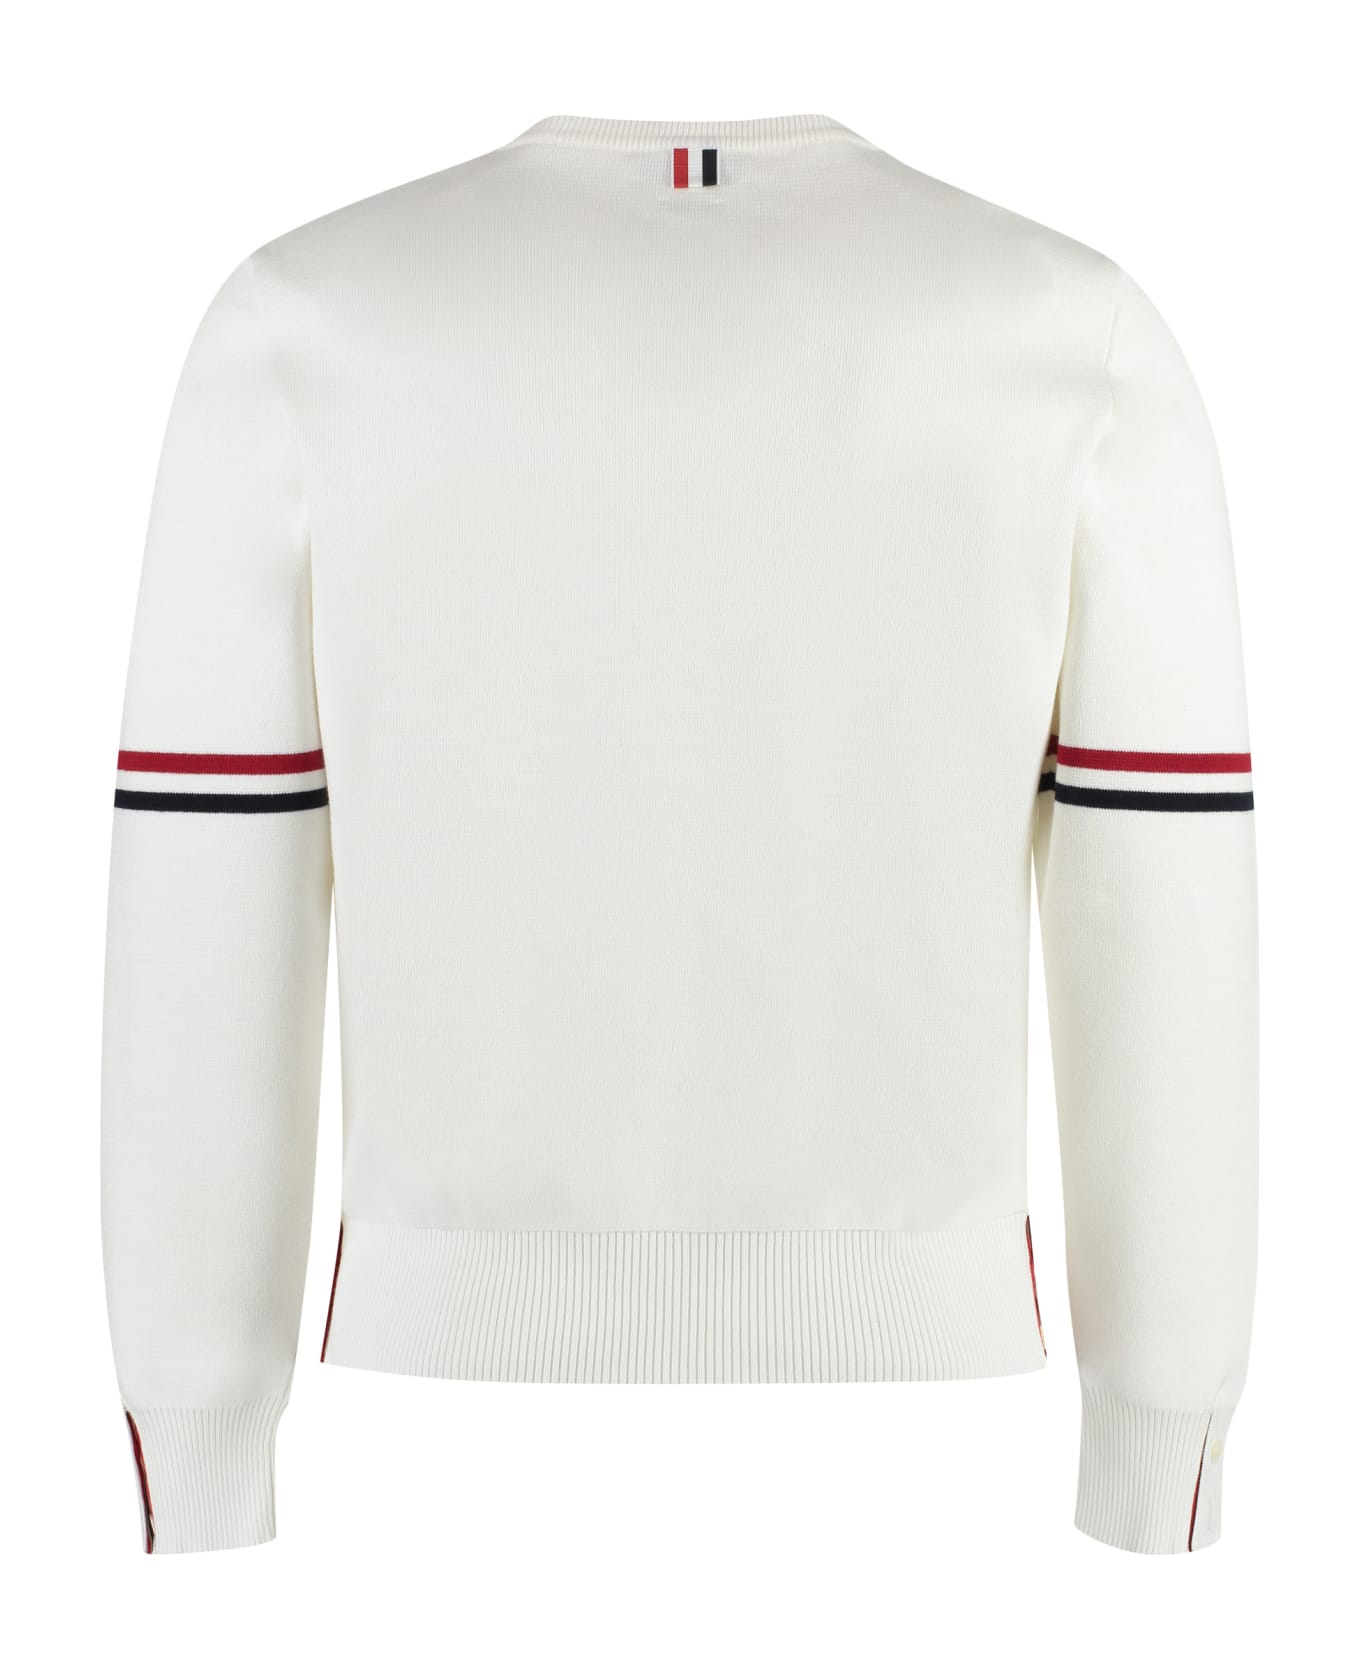 Thom Browne Long Sleeve Crew-neck Sweater - White